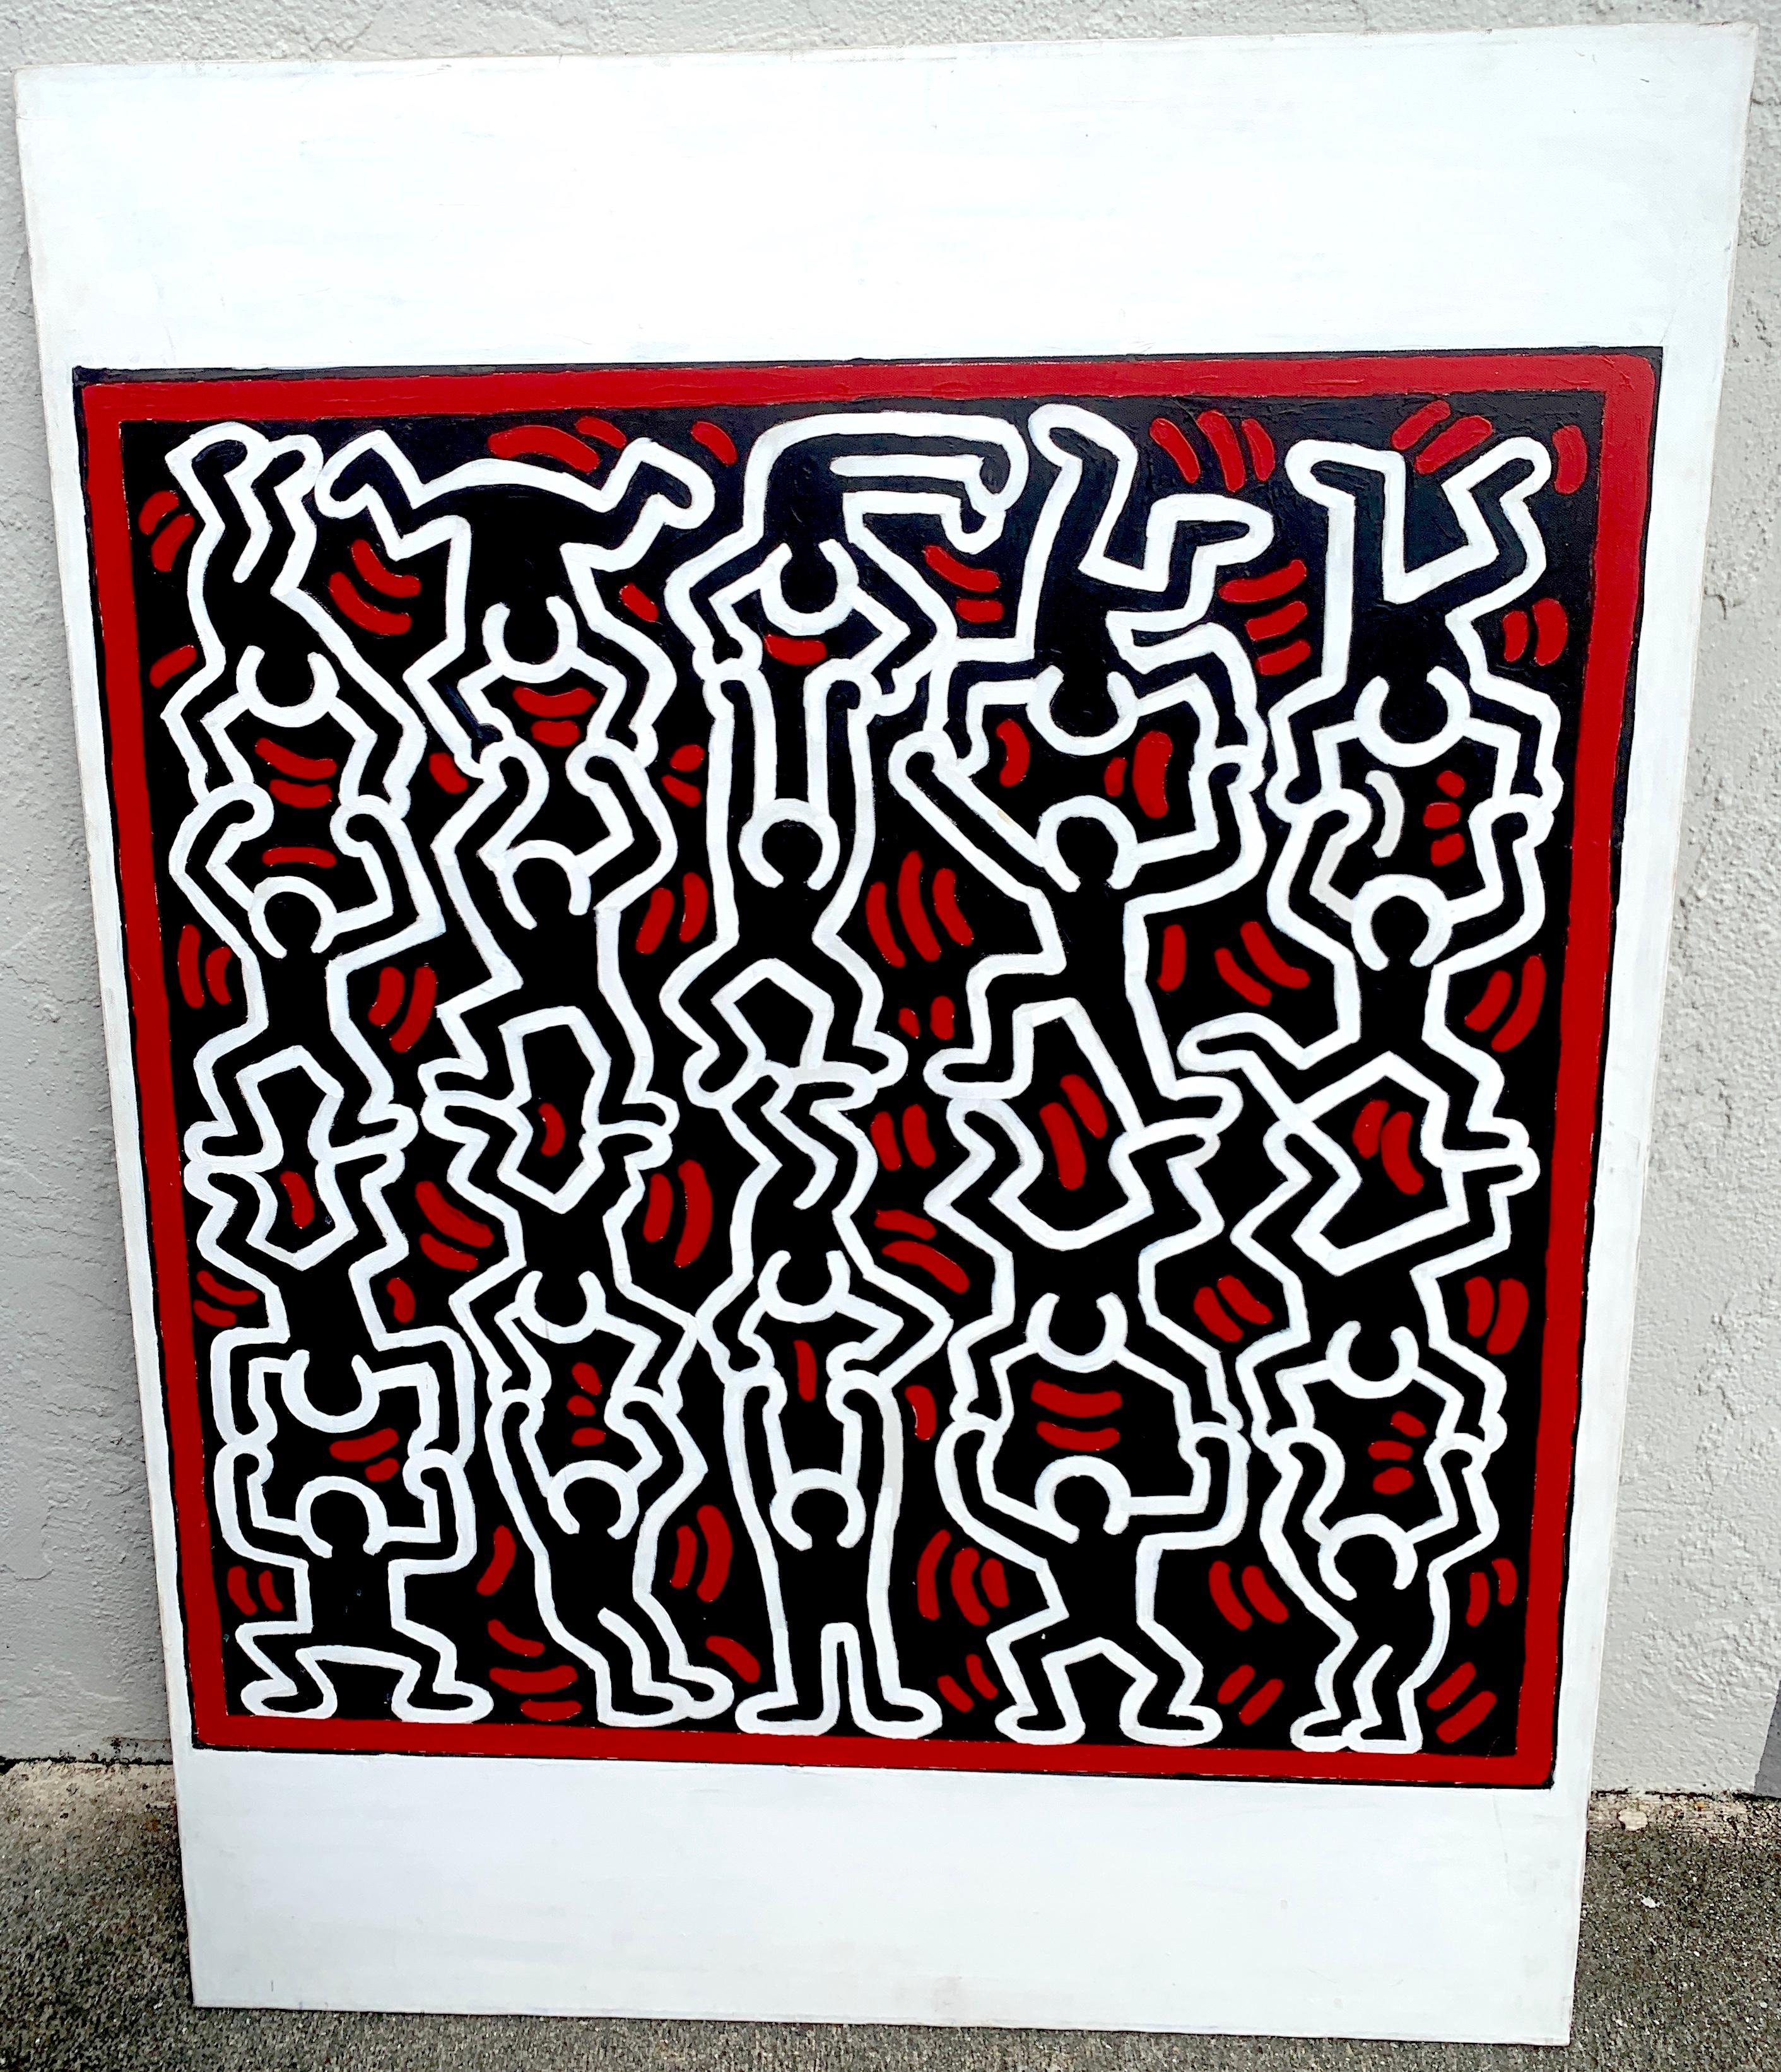 Untitled, After Keith Haring
Vintage unsigned well executed oil on canvas of figures supporting each other, the center image measures 33.5